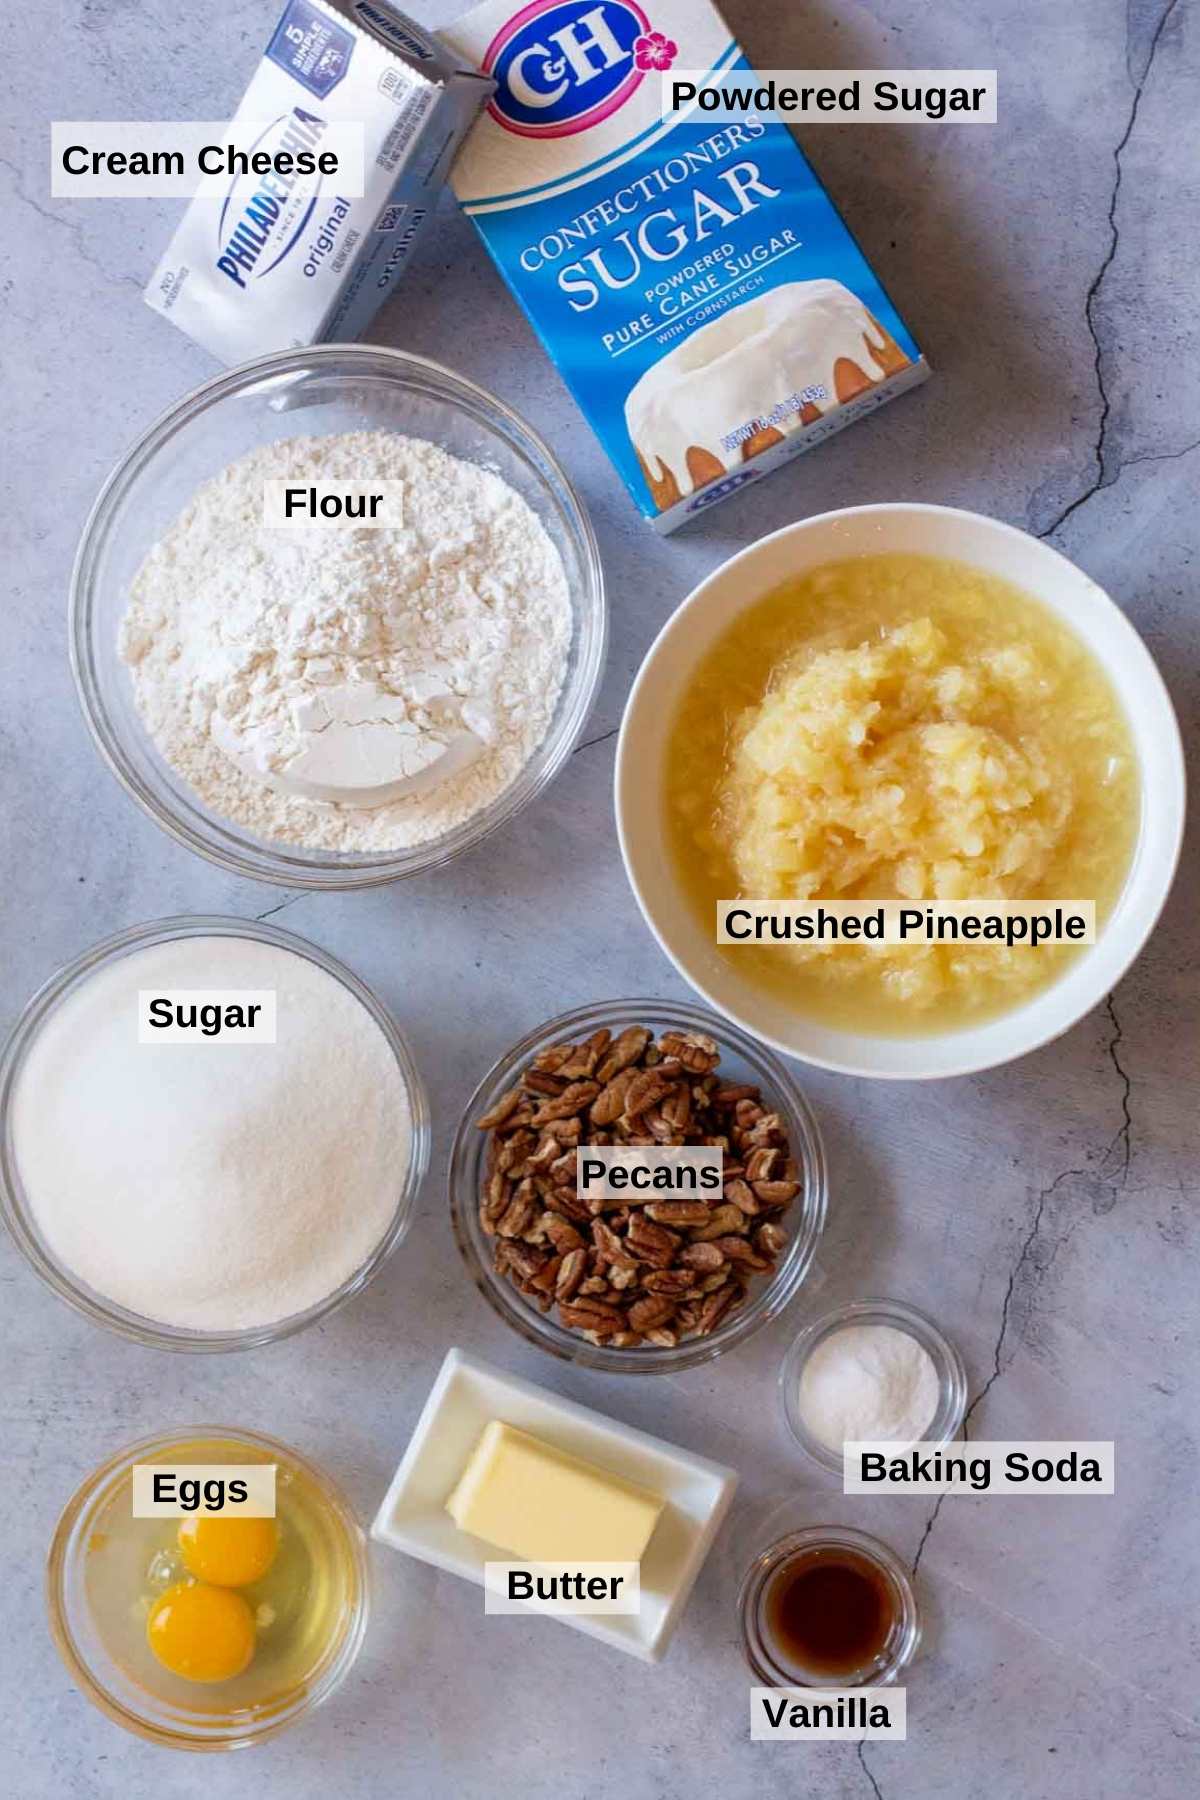 Ingredients to make old fashioned pineapple cake with crushed pineapple.